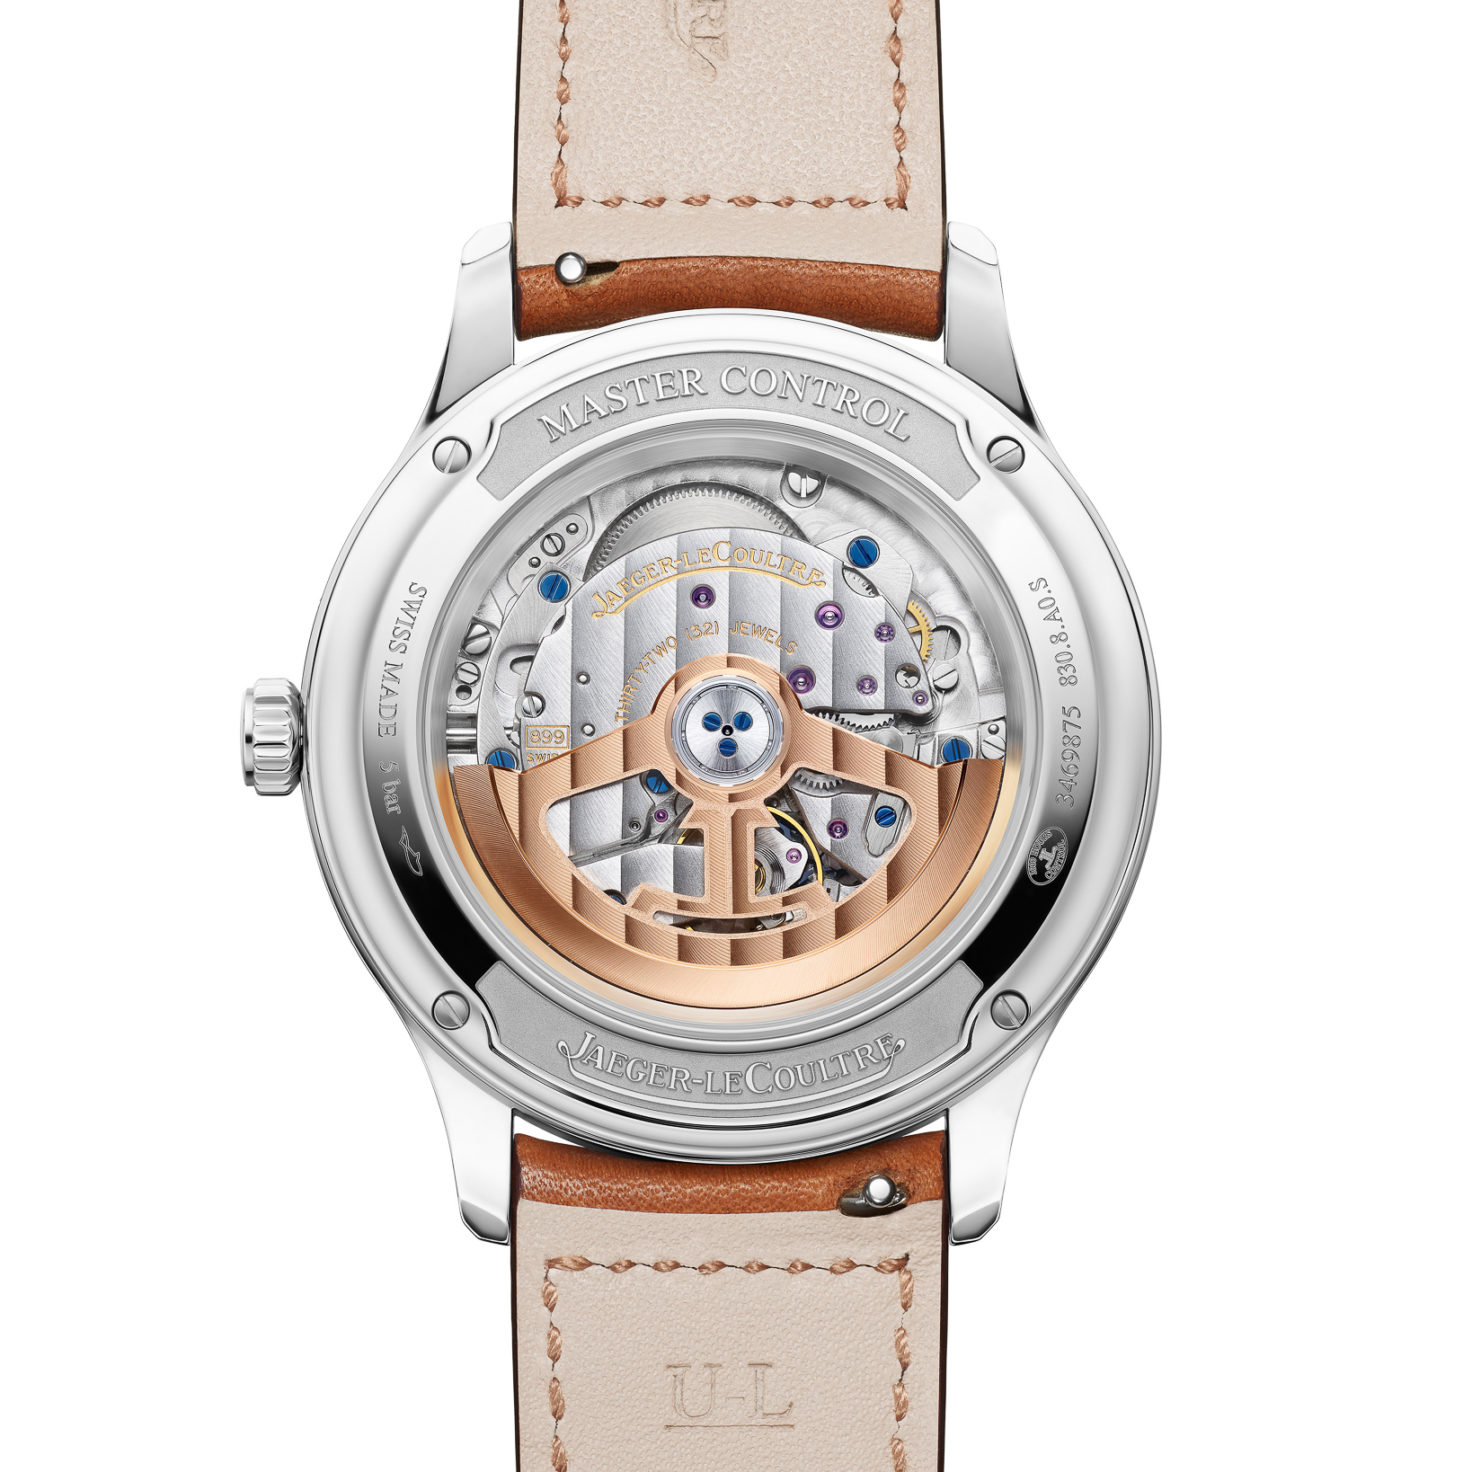 Jaeger LeCoultre Refreshes The Master Control With Upgraded Movements ...